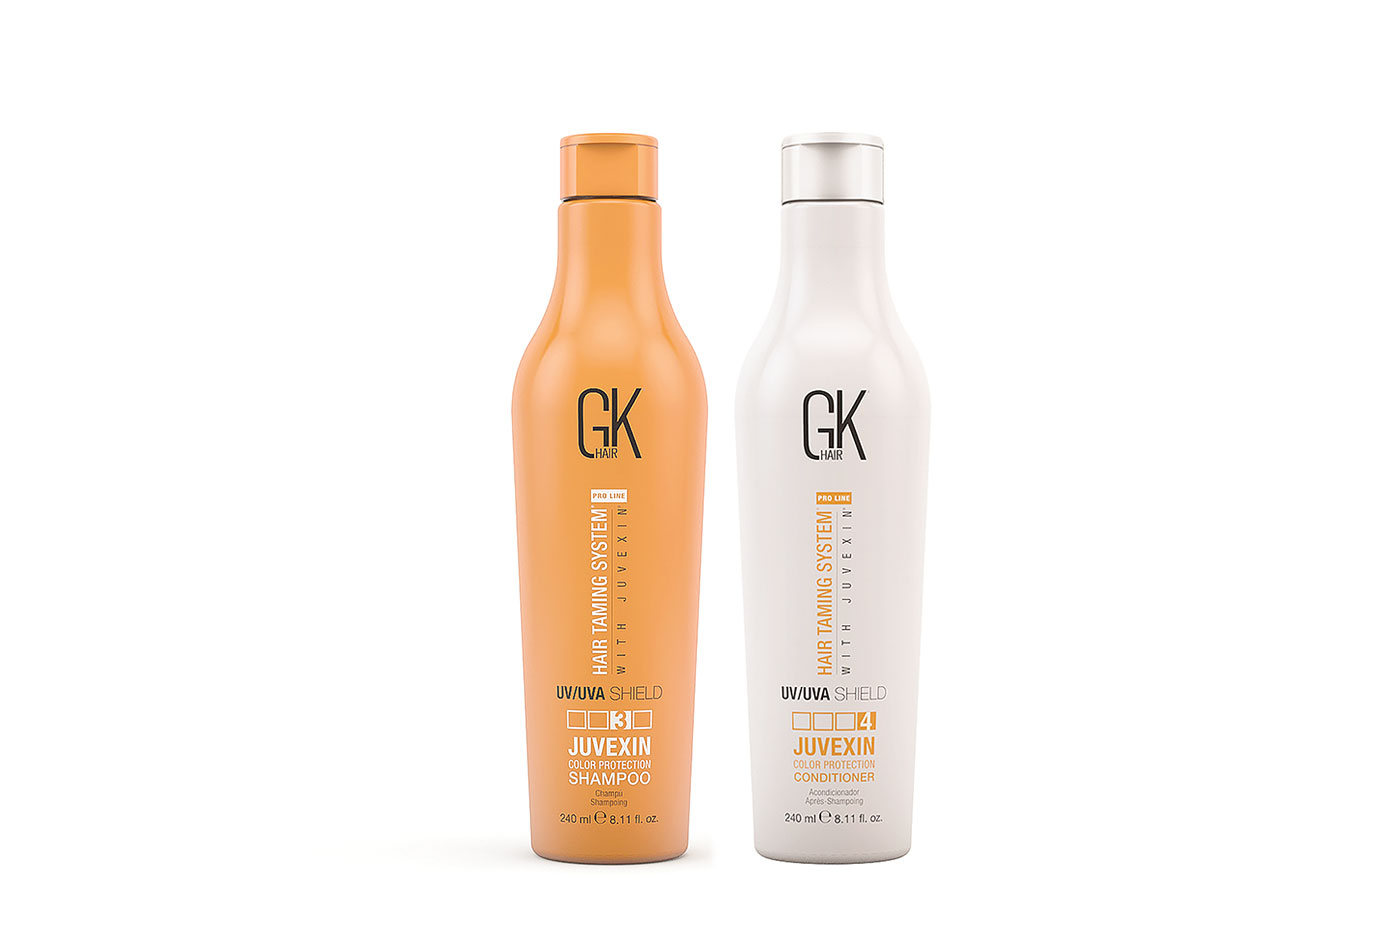 GK Hair's Color Shield shampoo & conditioner for protection from UV/UVA  rays - StyleSpeak